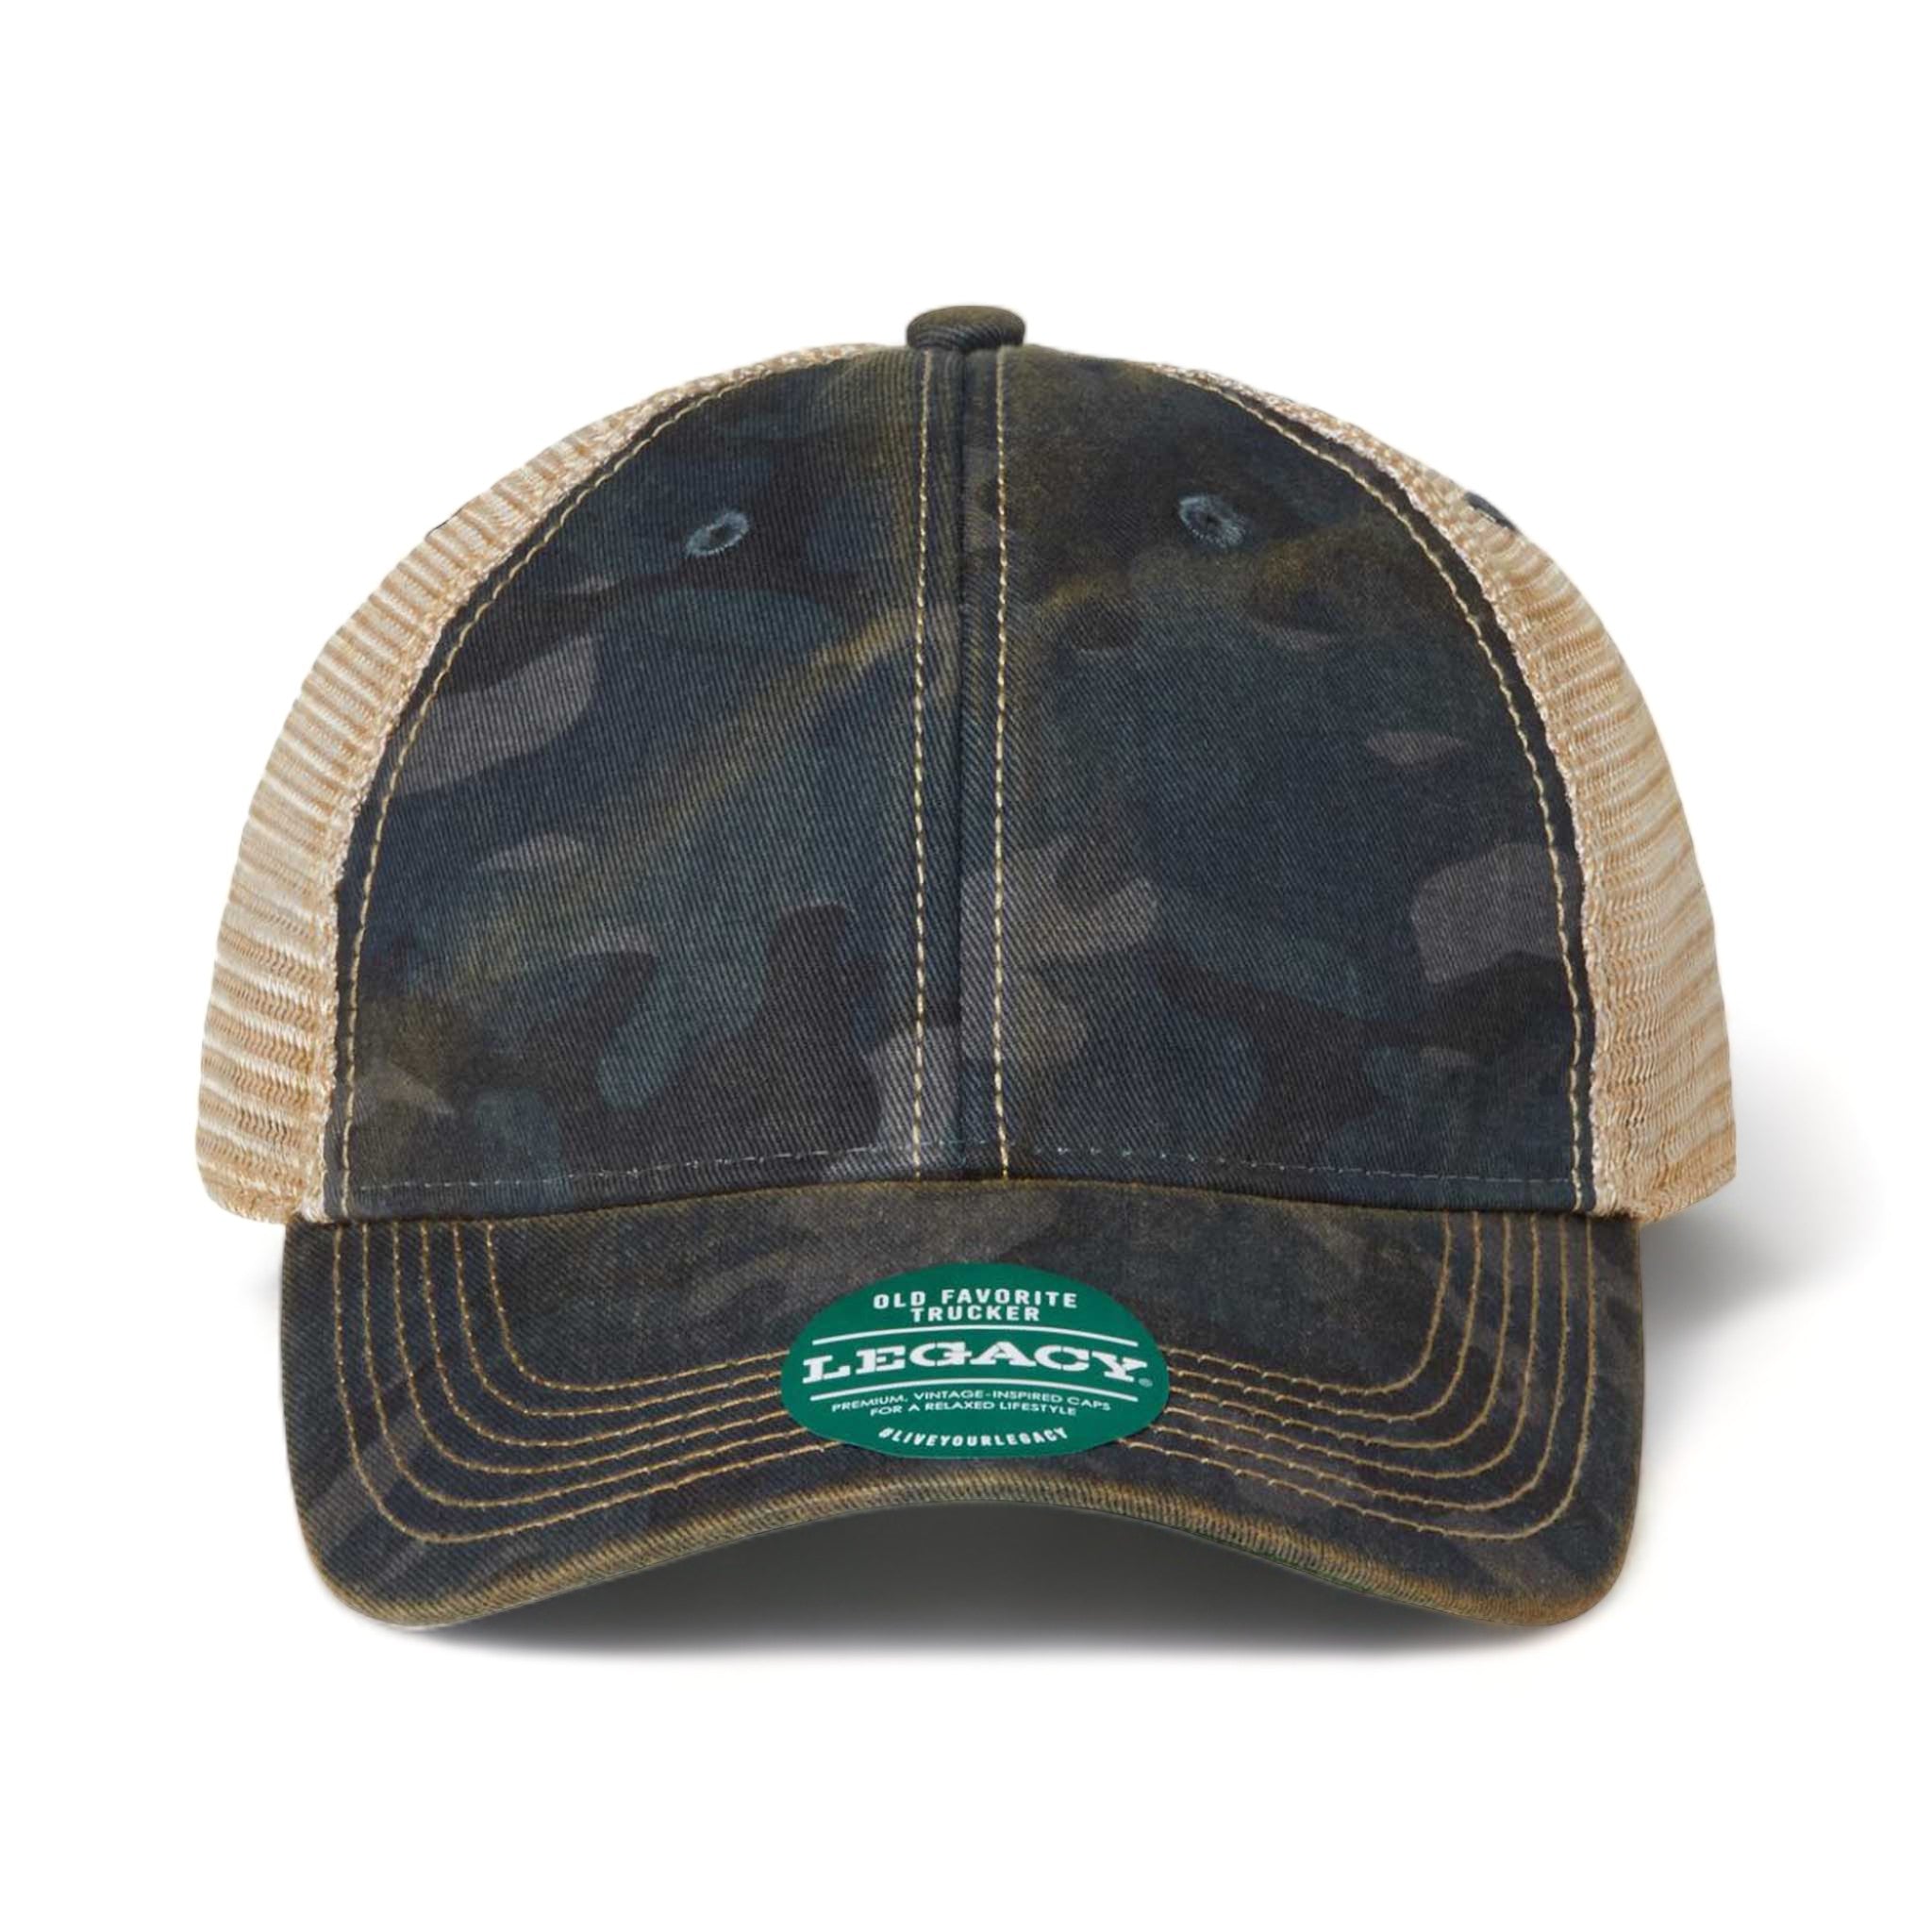 Front view of LEGACY OFA custom hat in navy field camo and khaki